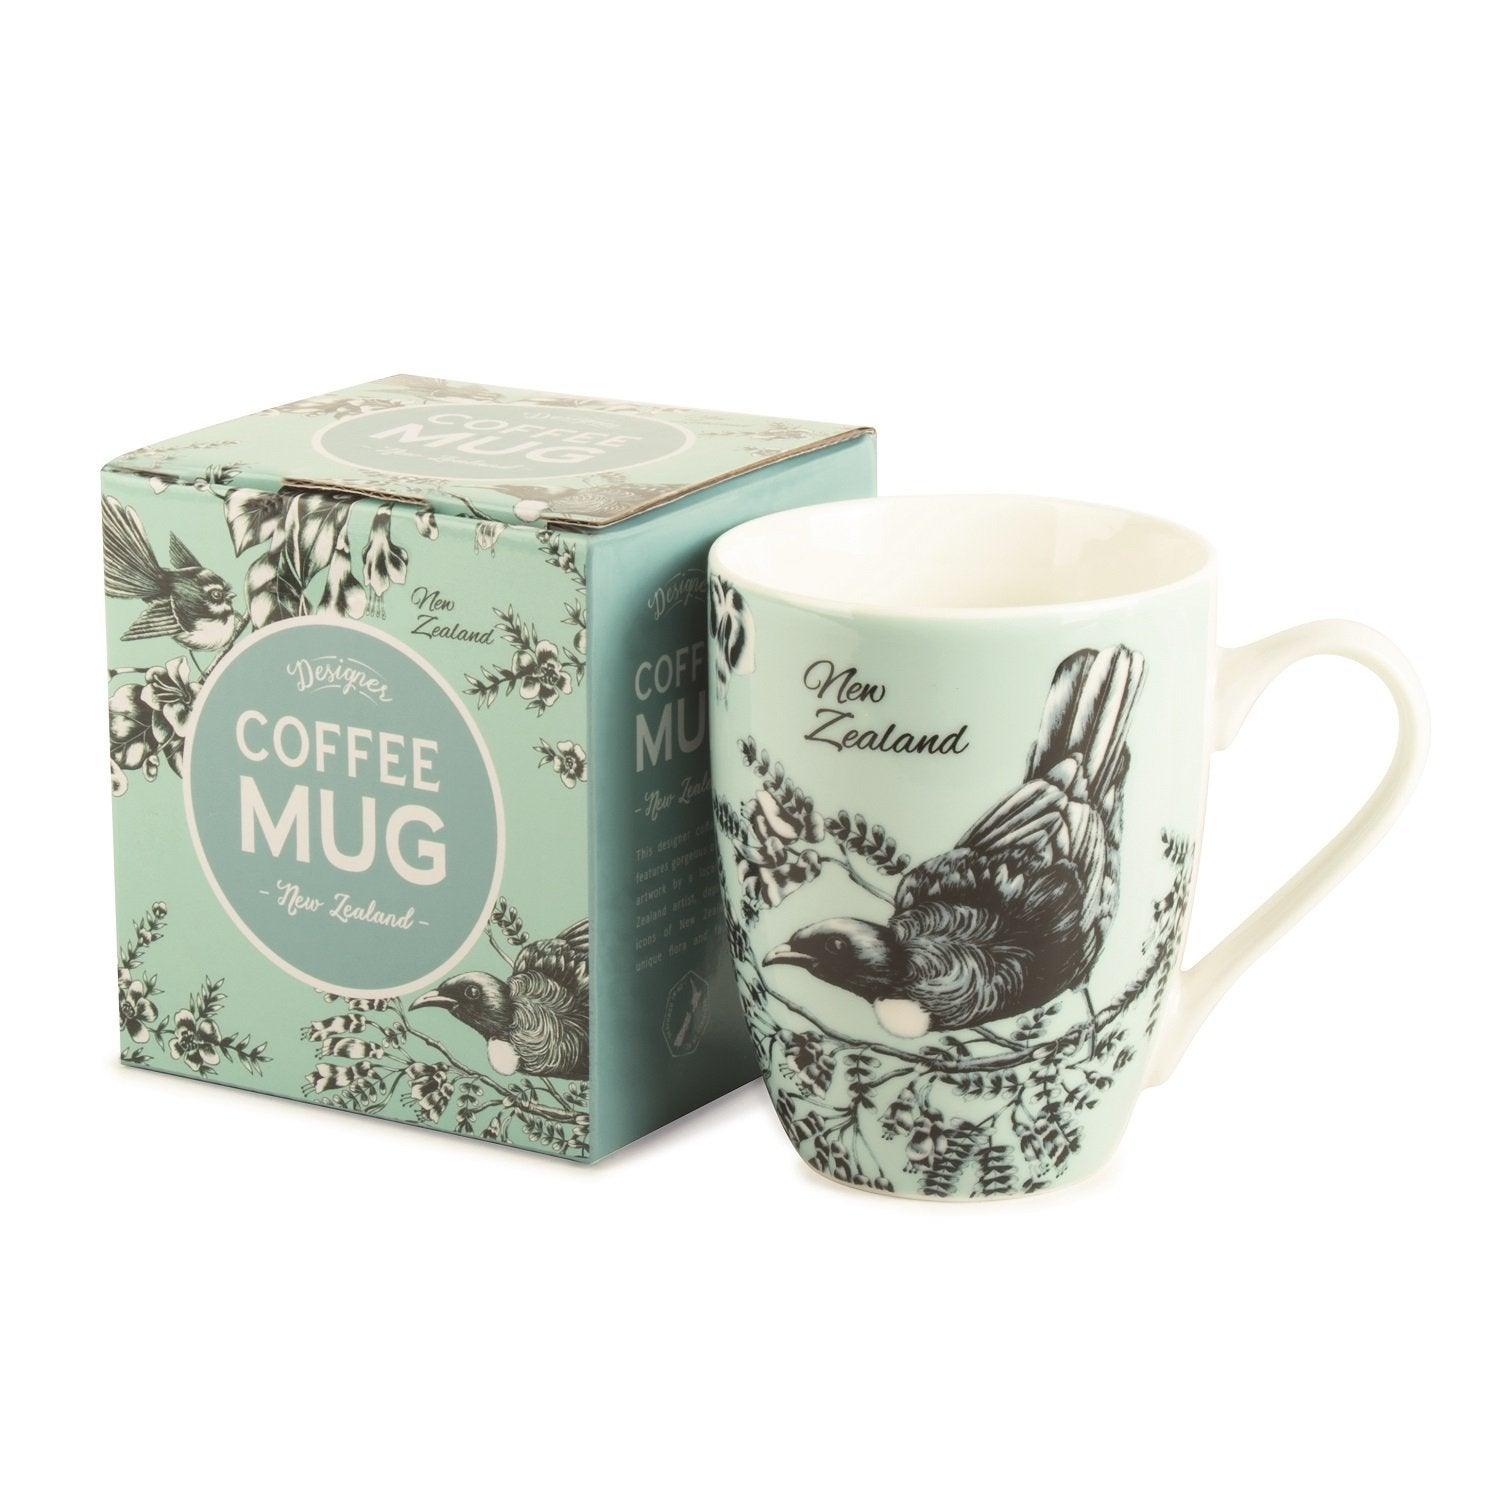 Light blue coffee mug with a bird on it and box next to it.